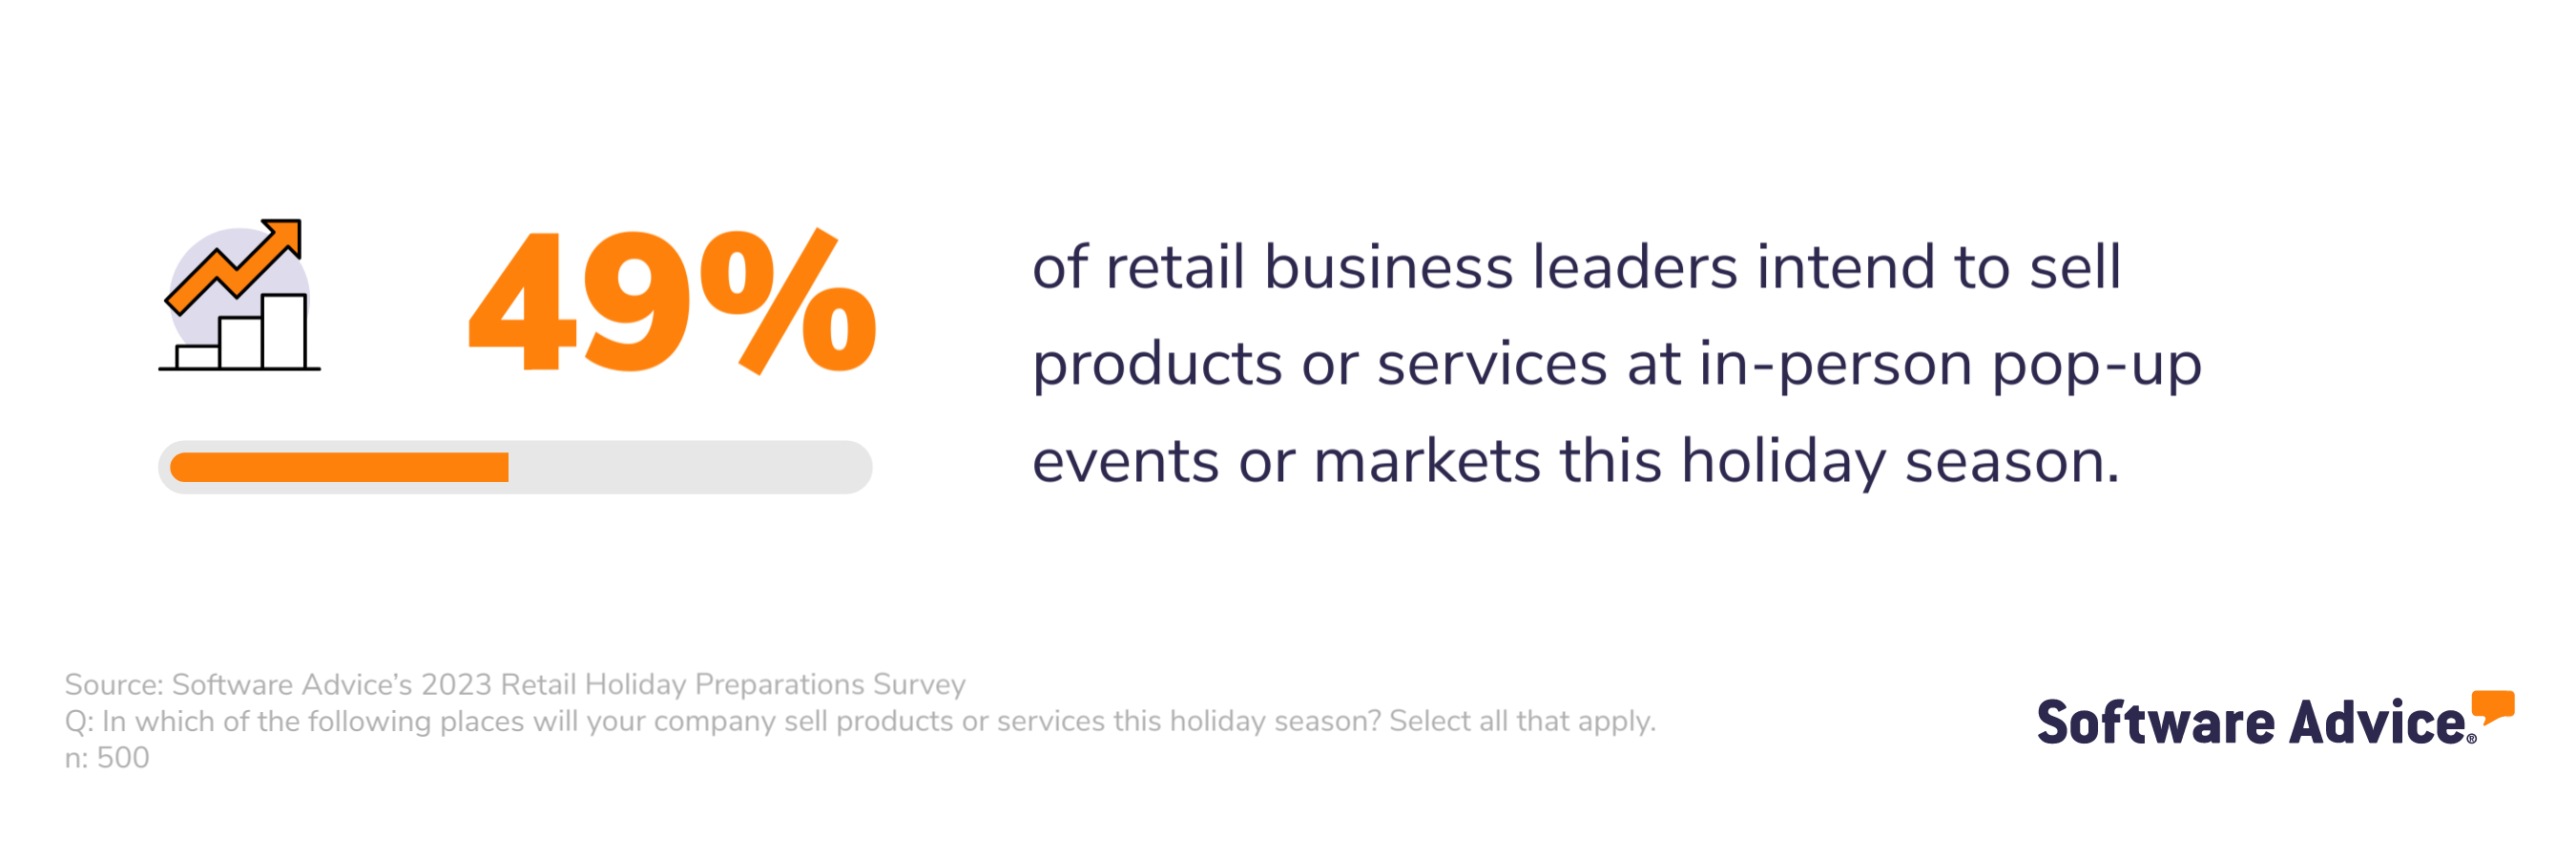 49% of retail business leaders intend to sell products or services at in-person pop-up events or markets this holiday season.